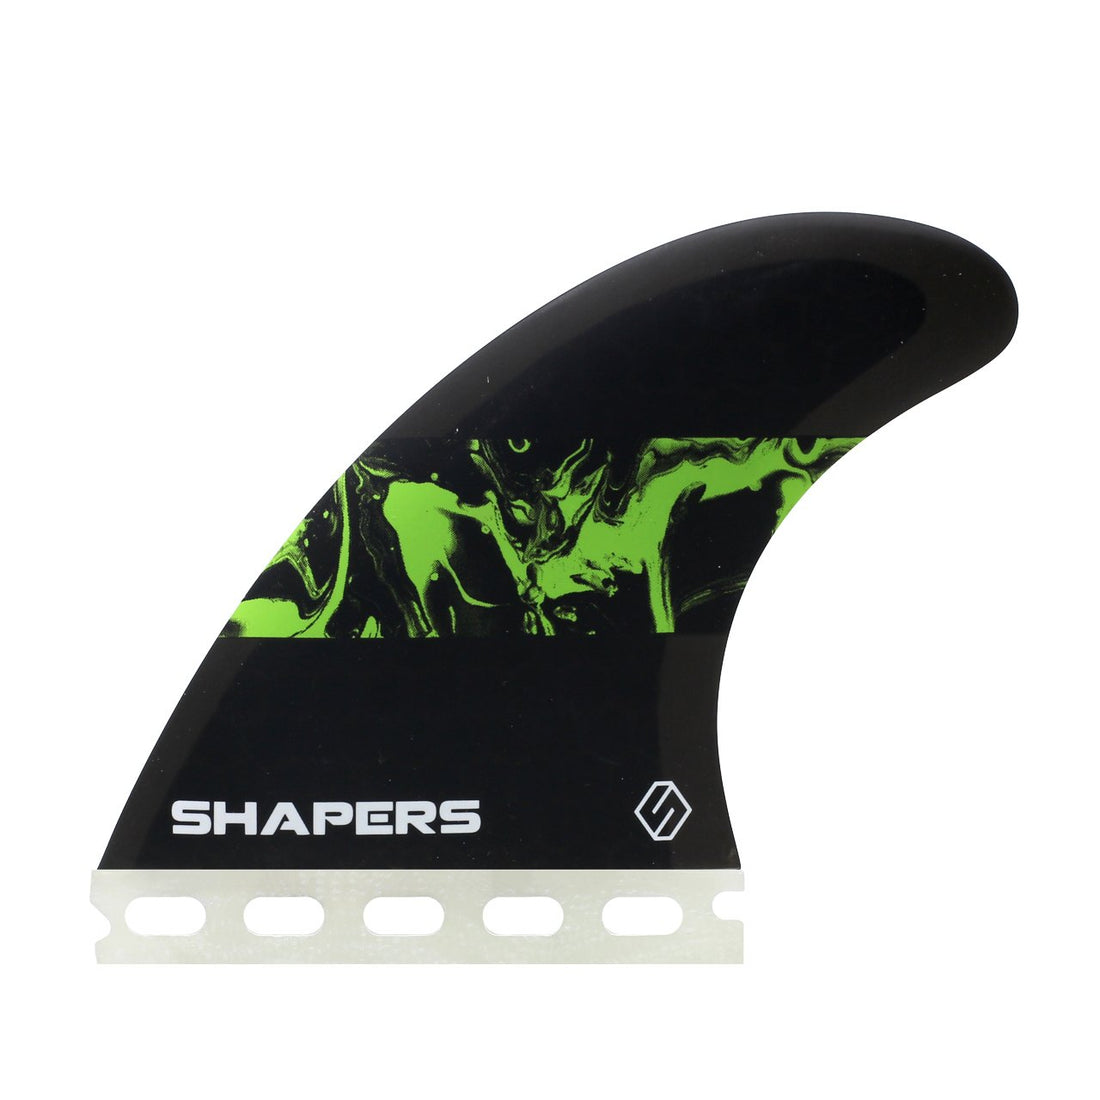 https://freeridesurfskate.co.nz/cdn/shop/products/Shapers_Fins_NZ_Best_Selection_Best_Price_Free_Shipping_core-lite-ml-s2-thruster_core-lite-s-singletab-thruster_eef00c6f-ee77-454c-b724-9c9f92c9f921.jpg?v=1621218850&width=1100